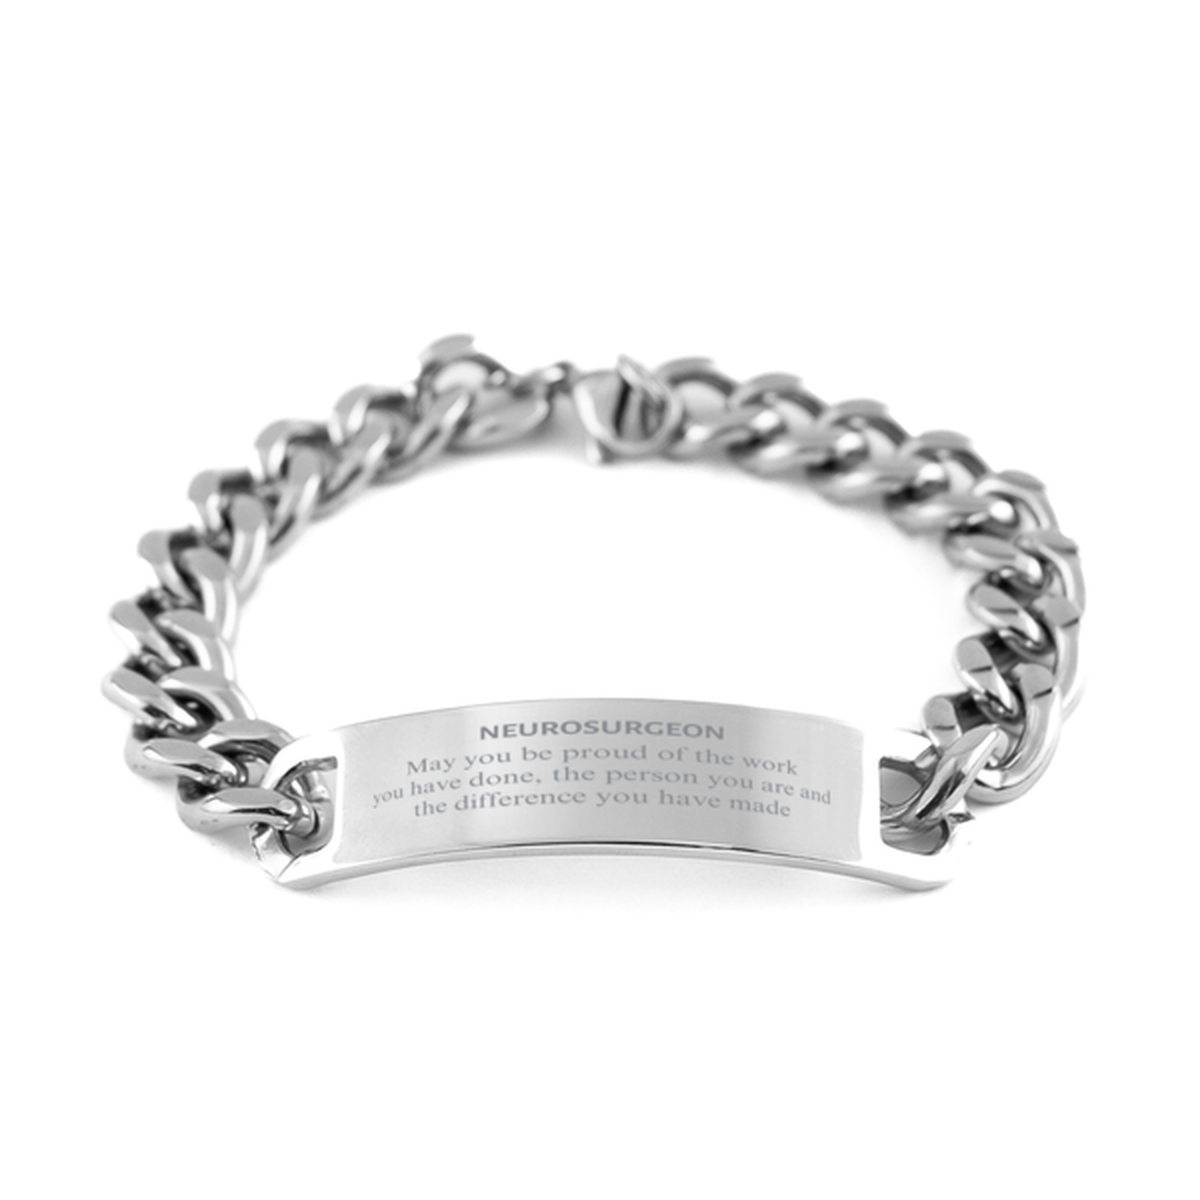 Neurosurgeon May you be proud of the work you have done, Retirement Neurosurgeon Cuban Chain Stainless Steel Bracelet for Colleague Appreciation Gifts Amazing for Neurosurgeon